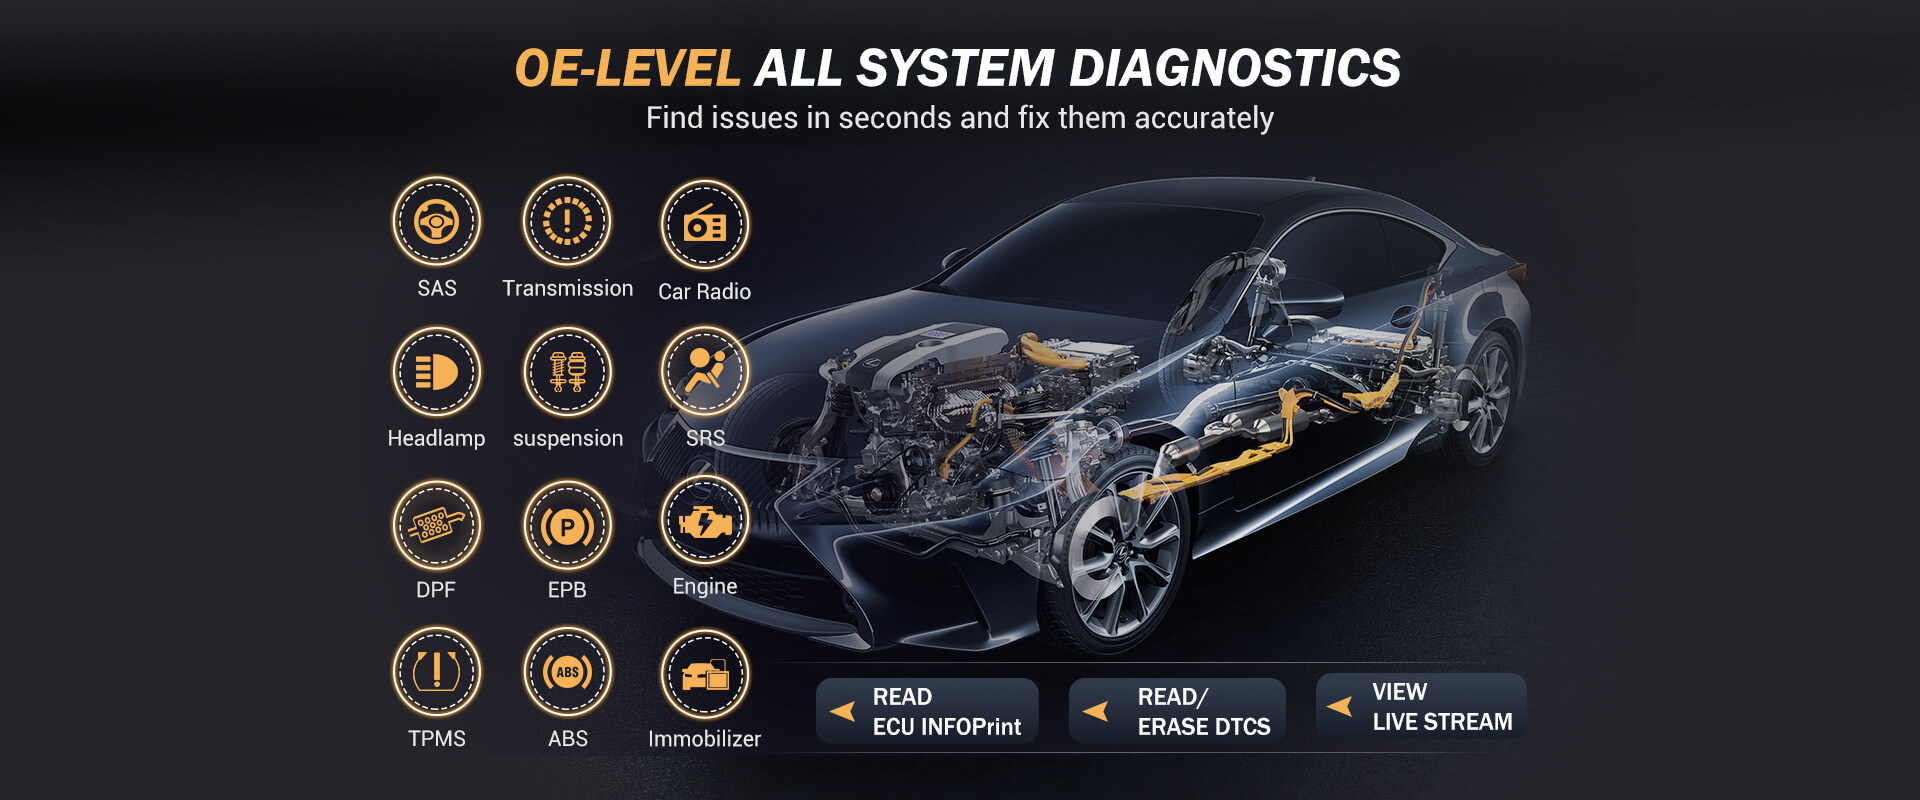 ADVANCED ALL SYSTEM DIAGNOSIS